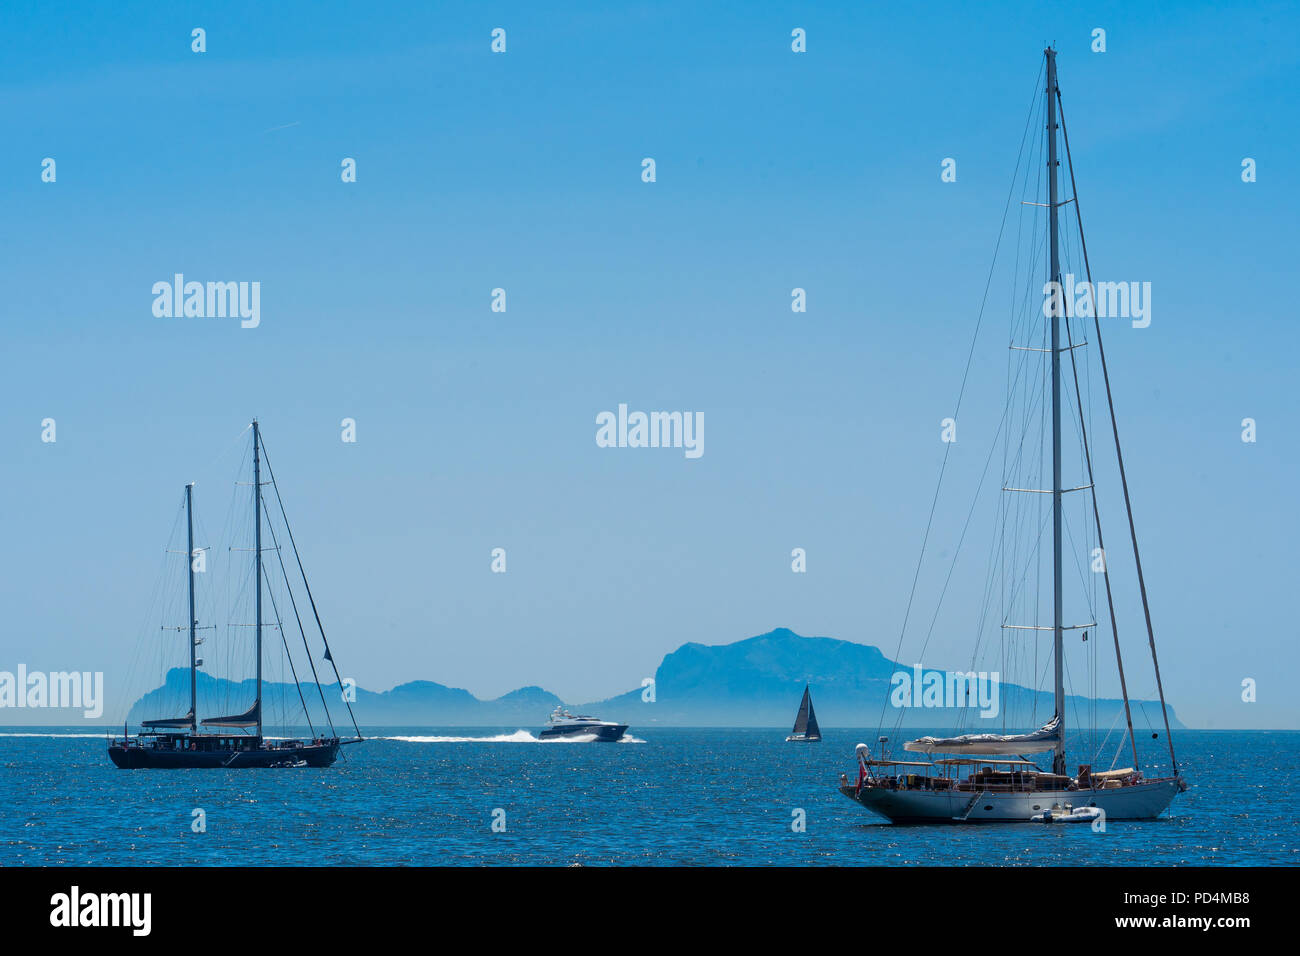 The island Capri seen behind boats from the waterfront in Naples, Italy Stock Photo